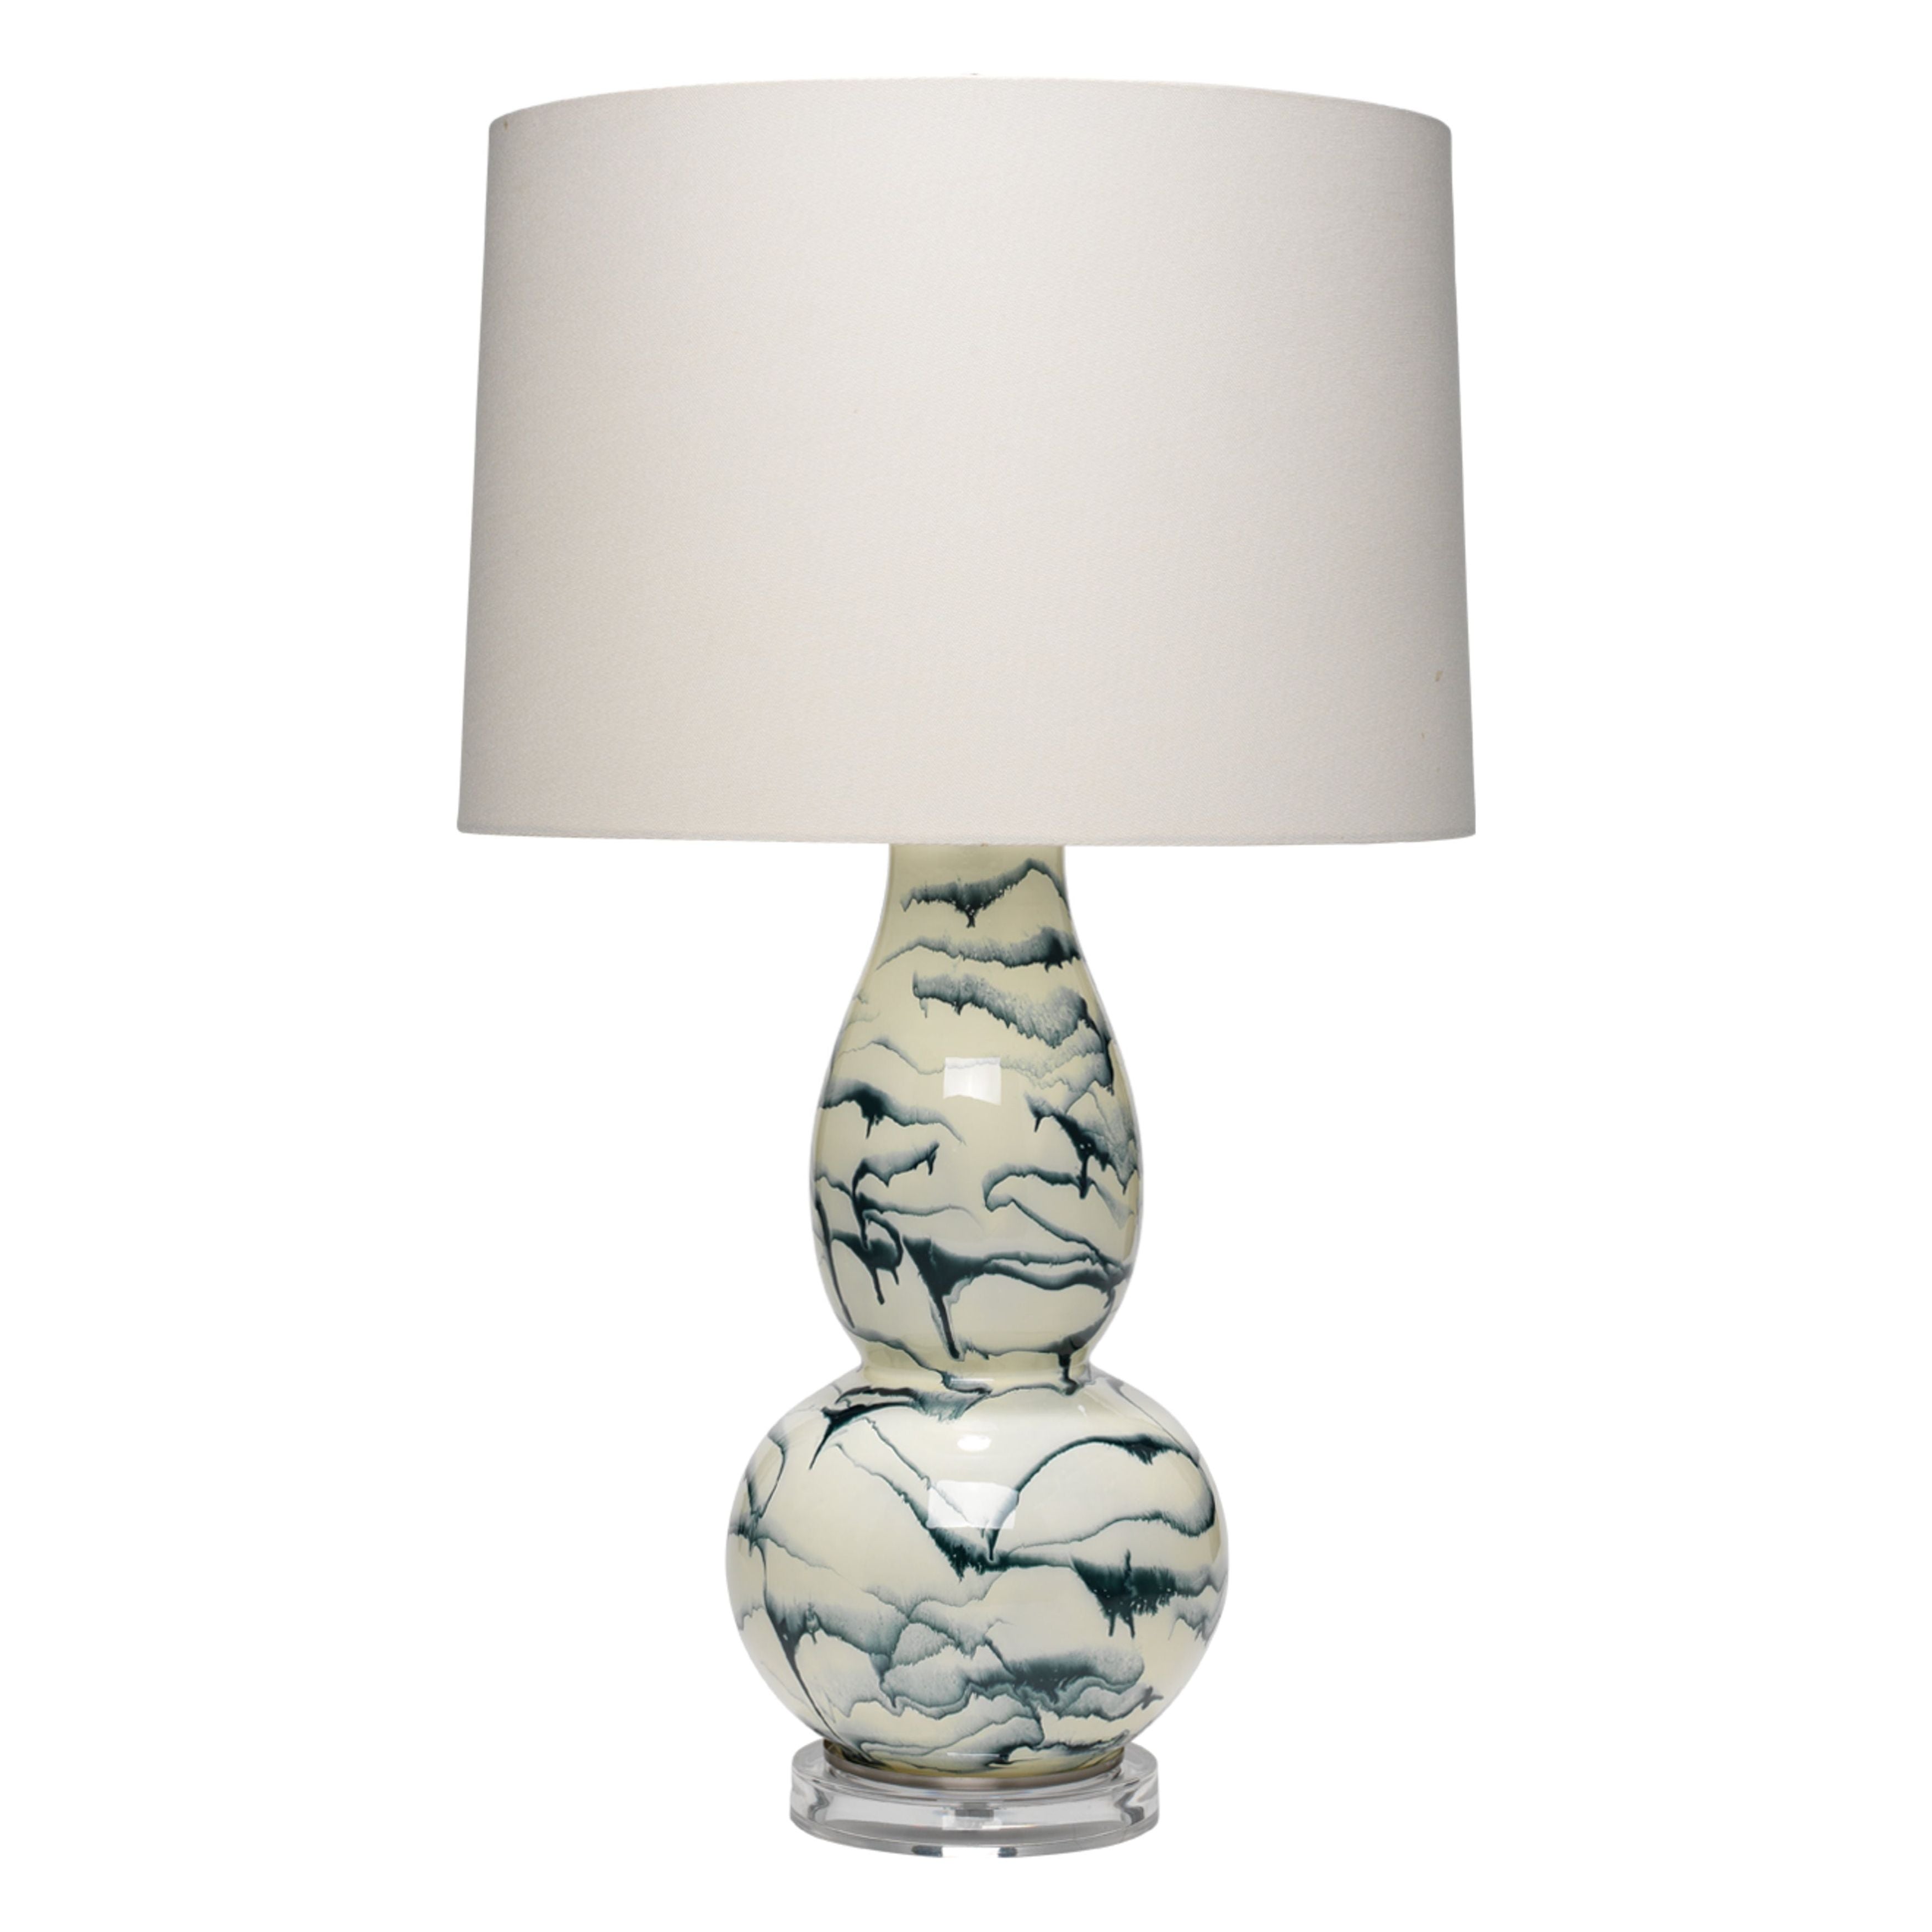 Jamie Young Company - LSELODIEBL - Elodie Table Lamp - Elodie - White, Blue